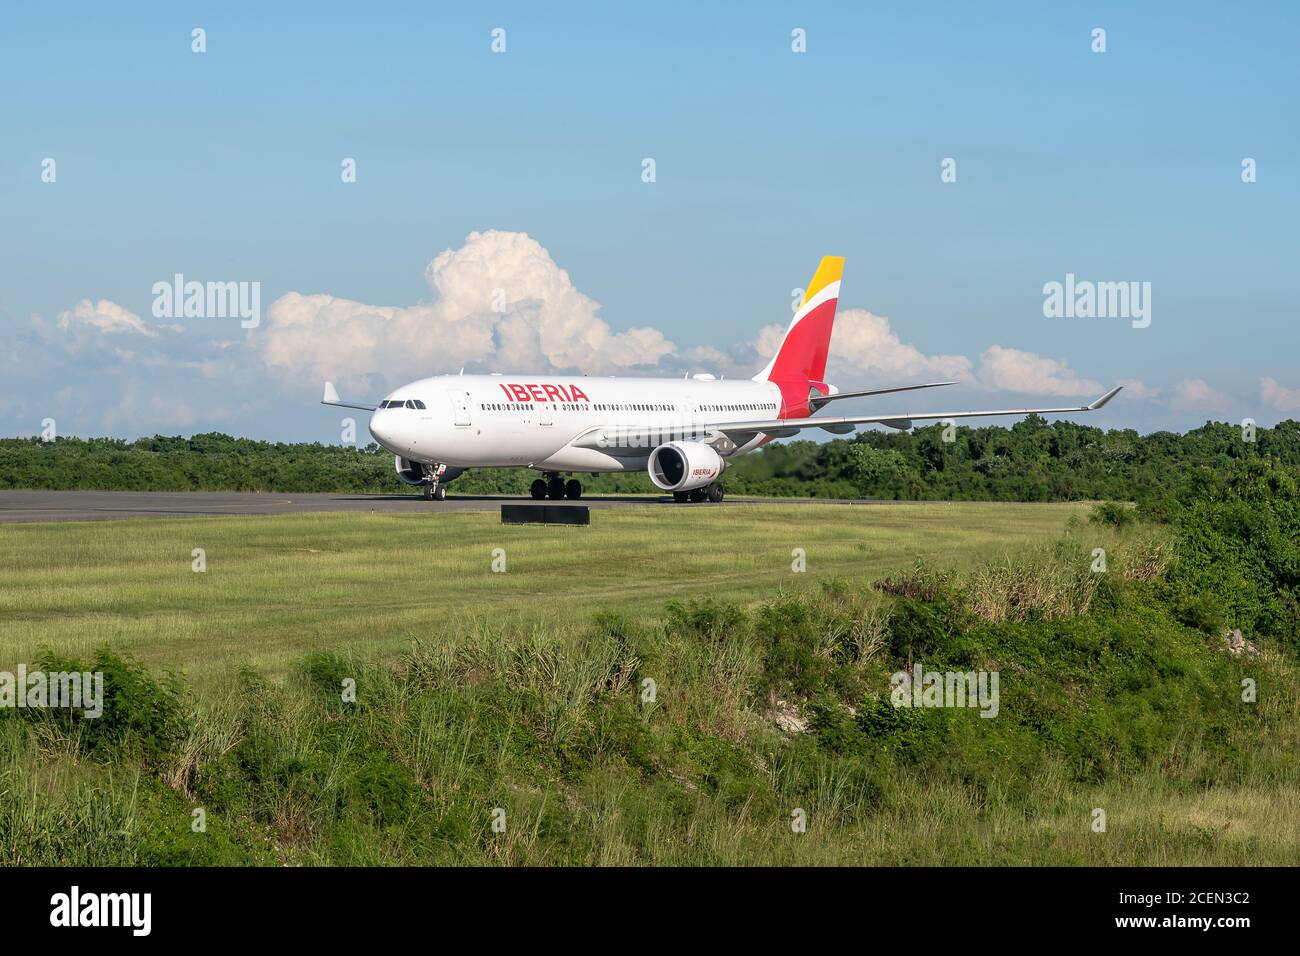 Frankfurt Germany 18.11.19 Iberia spanish Airline airplane jet being  starting on the airport ready for takeoff Stock Photo - Alamy